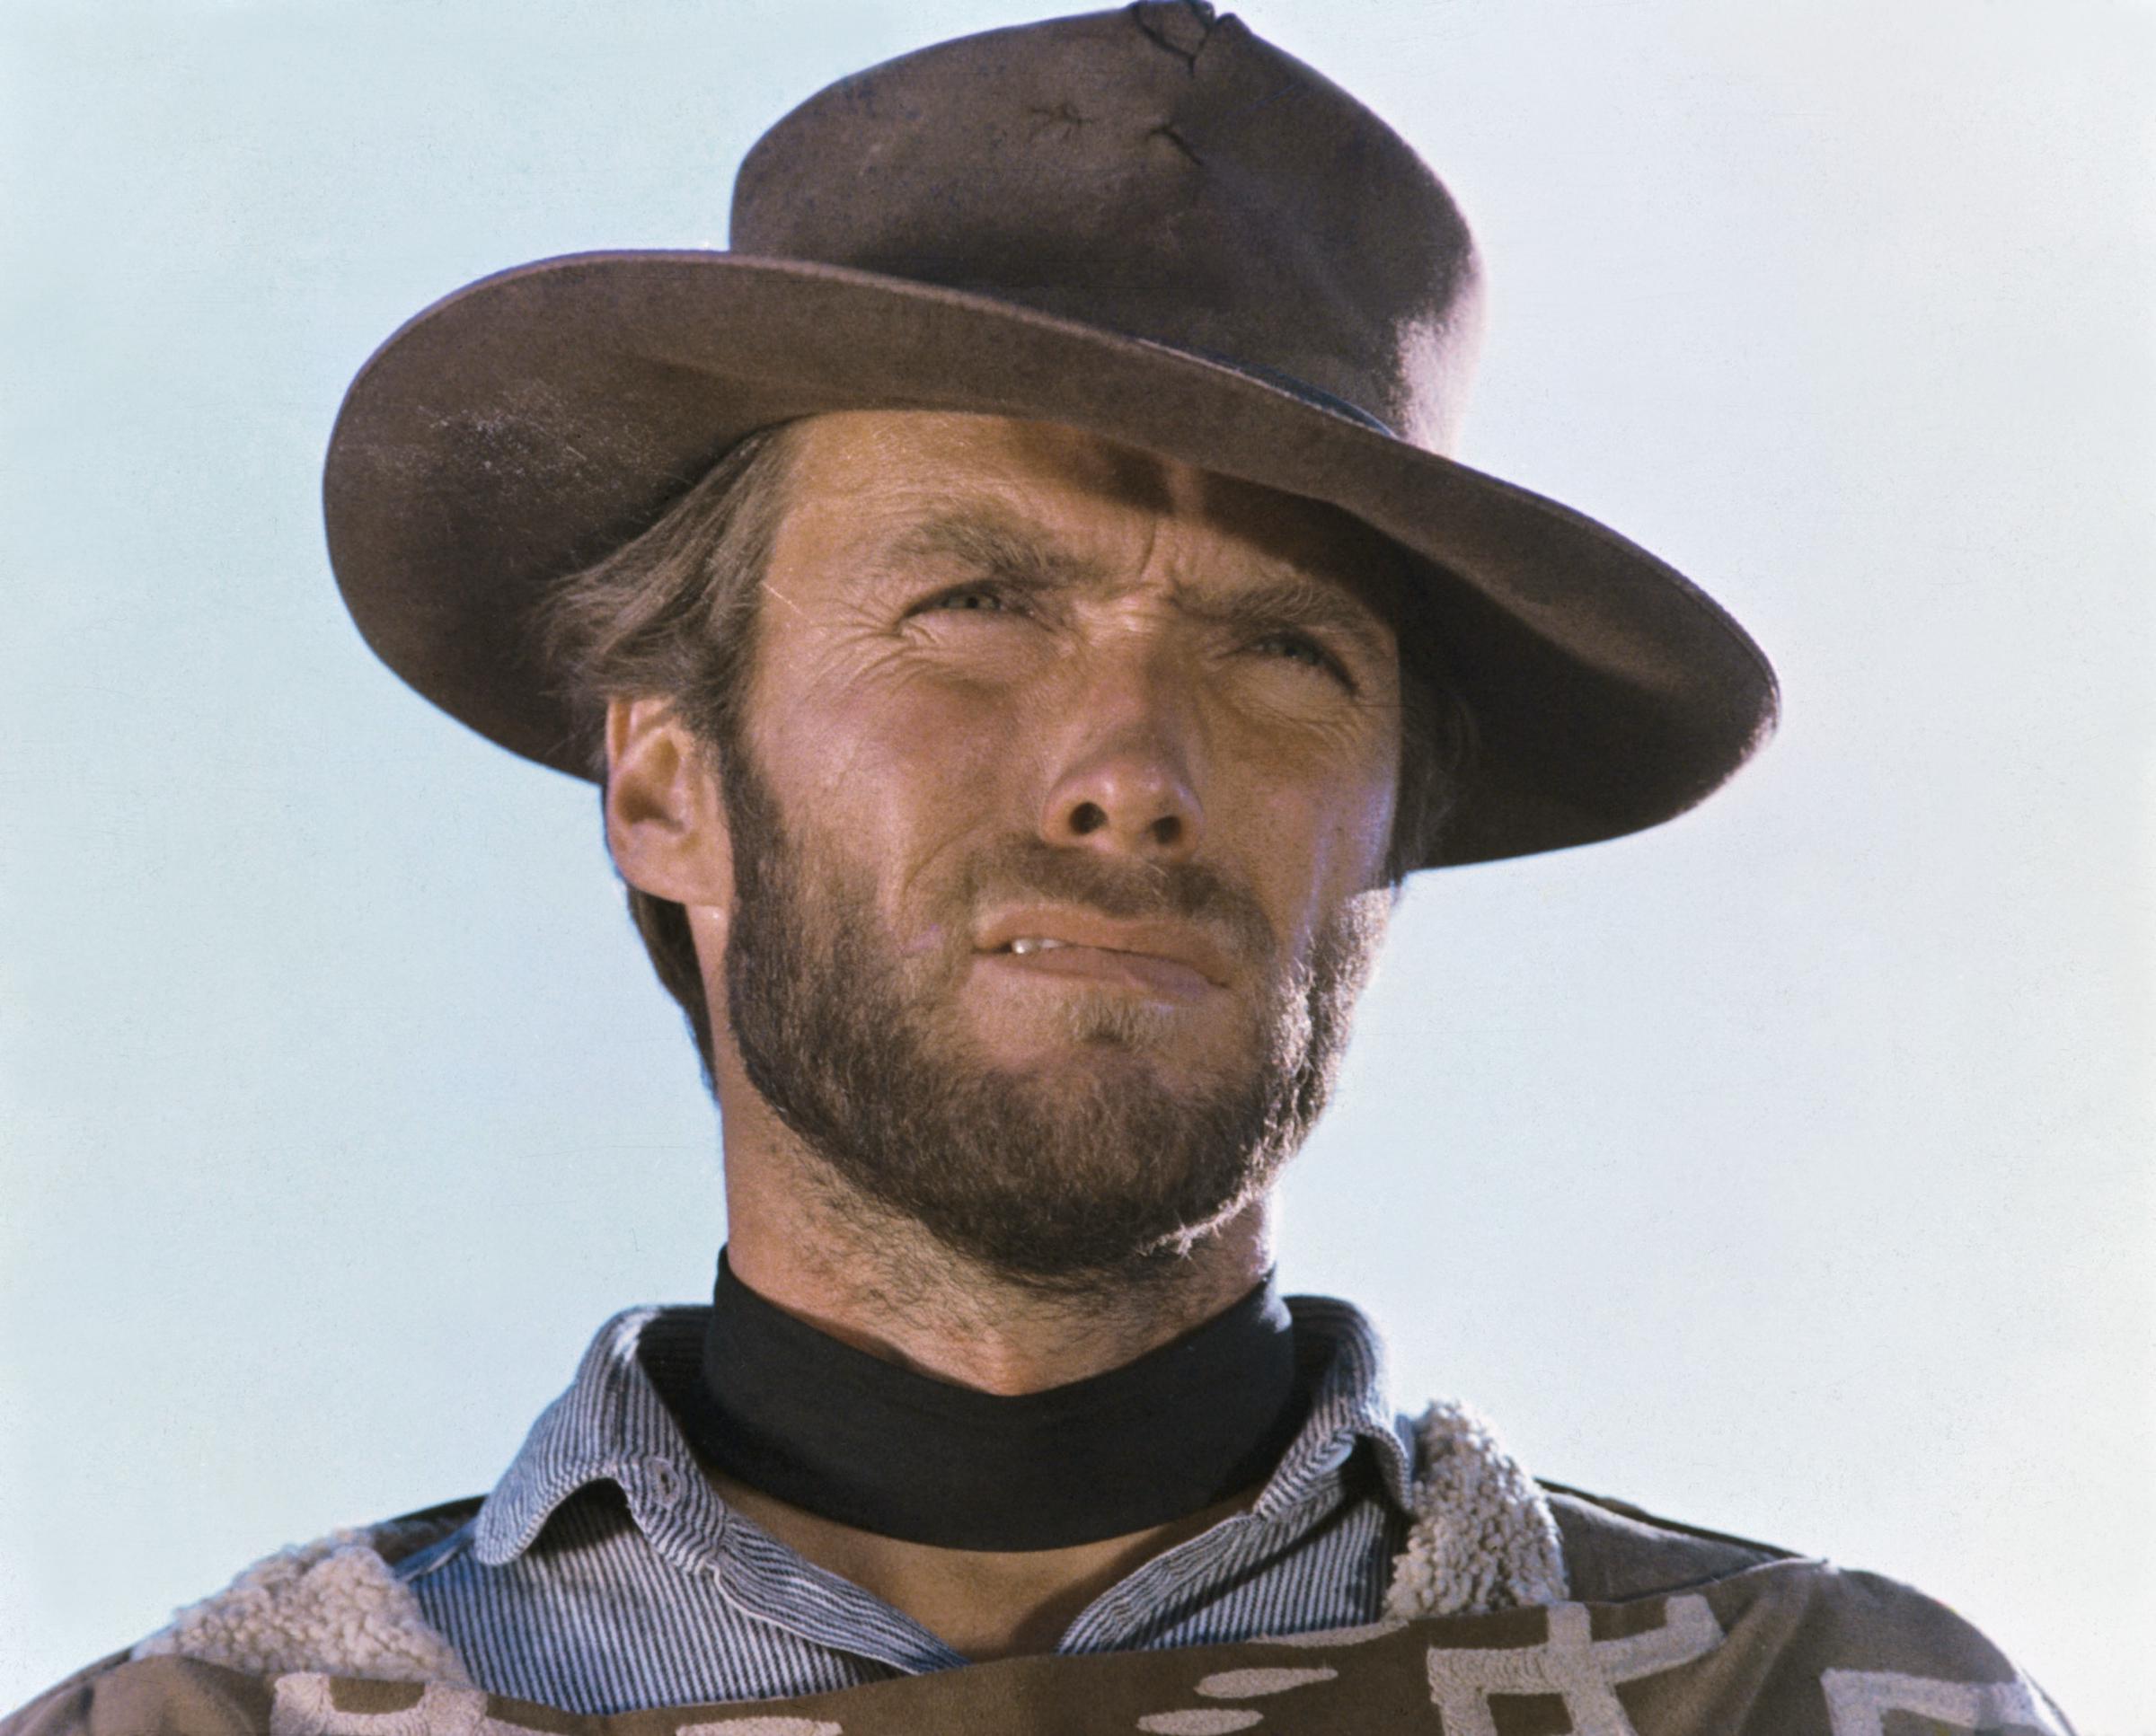 Clint Eastwood on the set of "The Good, The Bad and The Ugly" in January 1966 | Source: Getty Images